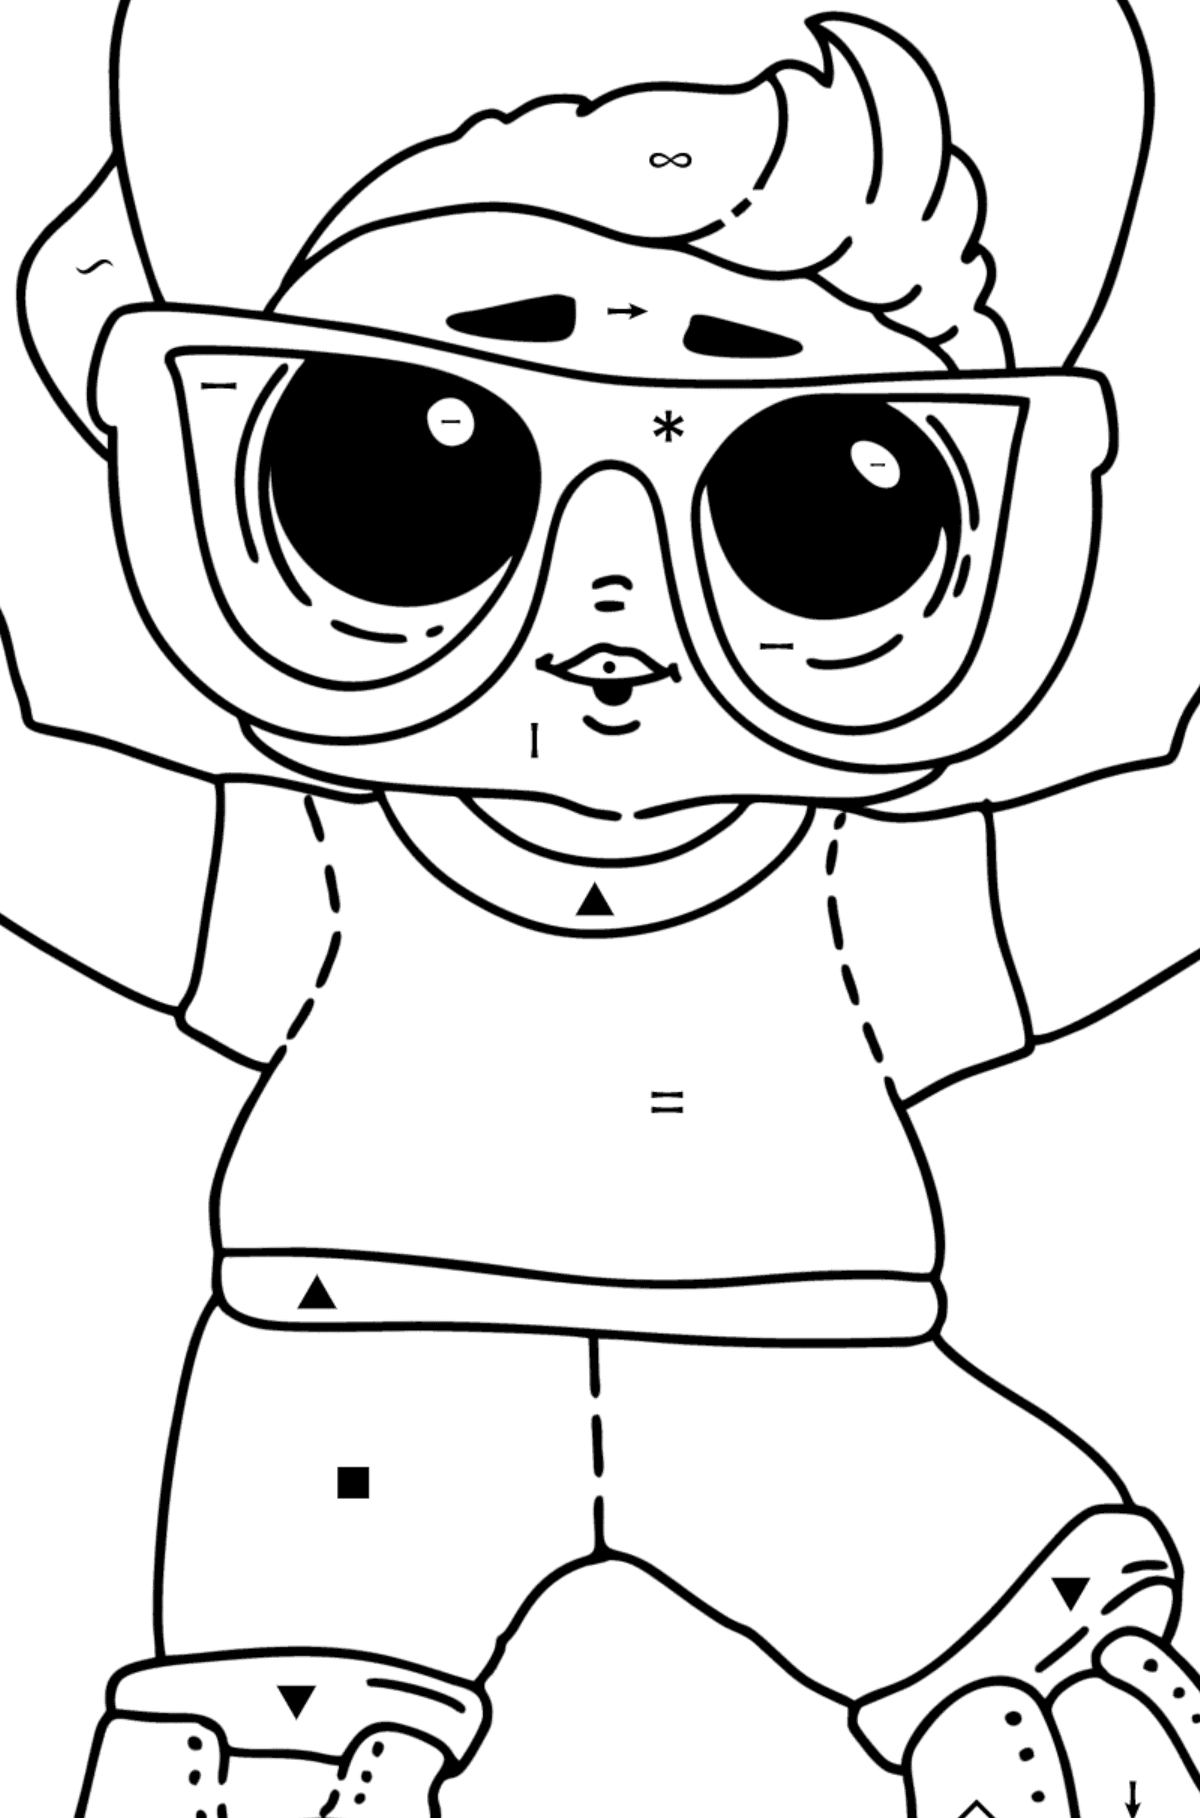 Coloring page LOL boy Next Door - Coloring by Symbols for Kids